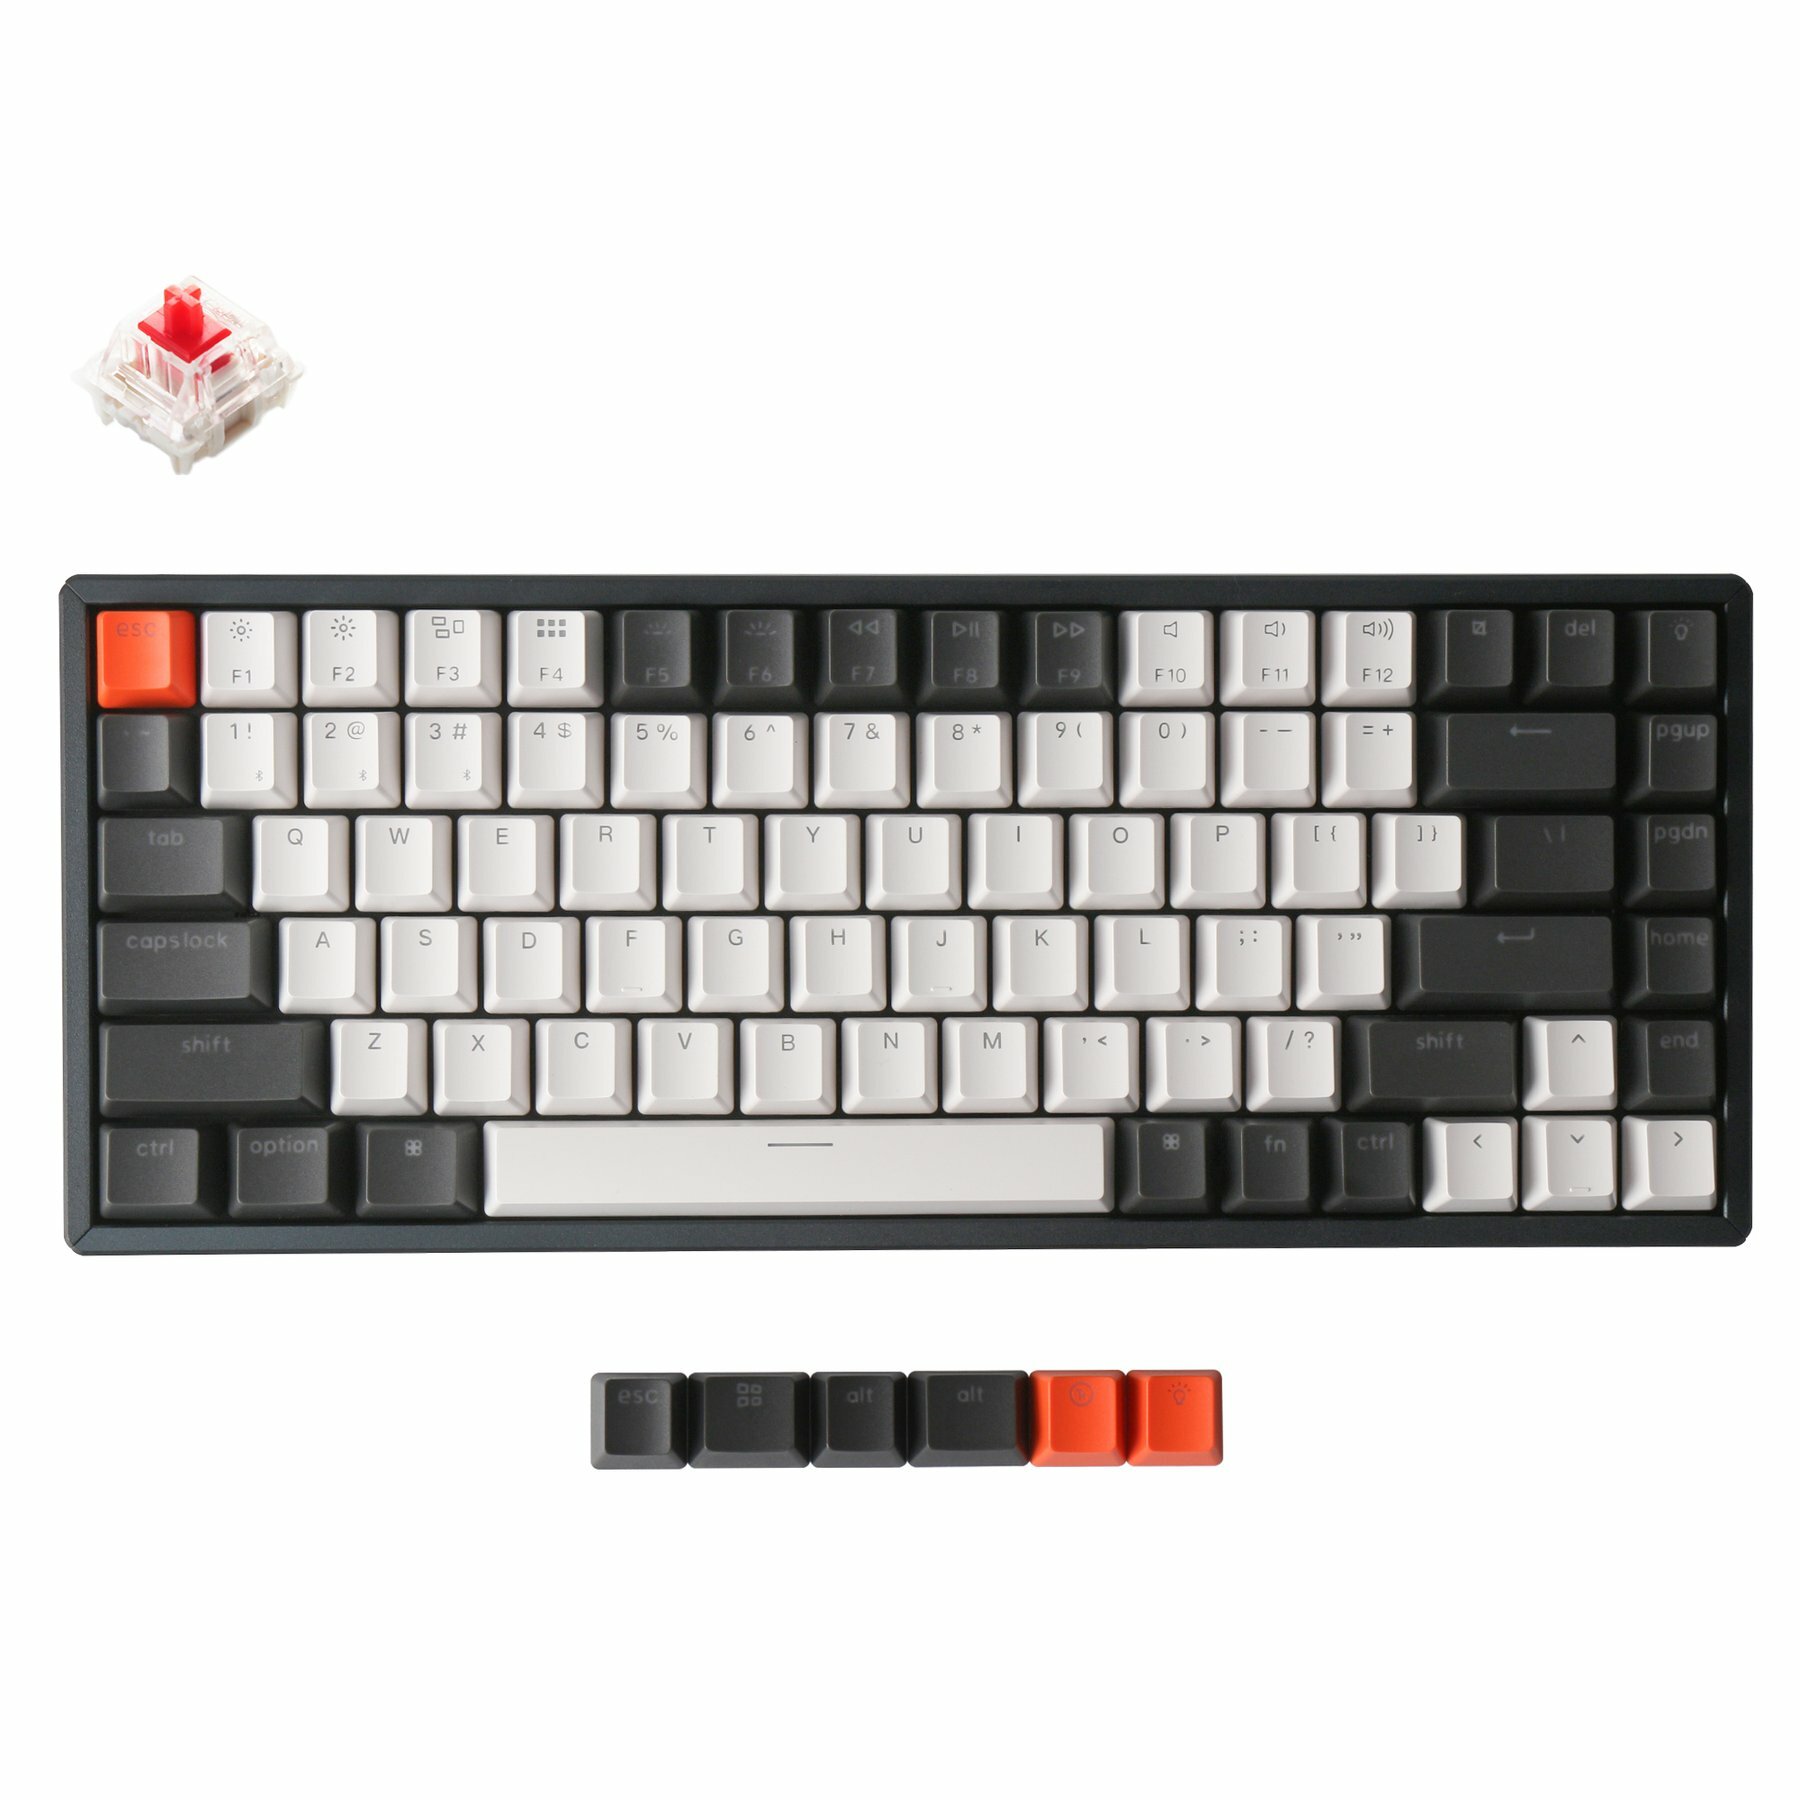 Keychron-K2-hot-swappable-wireless-mechanical-keyboard-for-Mac-Windows-iOS-Gateron-switch-red-with-type-C-RGB-white-backlight-aluminum-frame_1800x1800